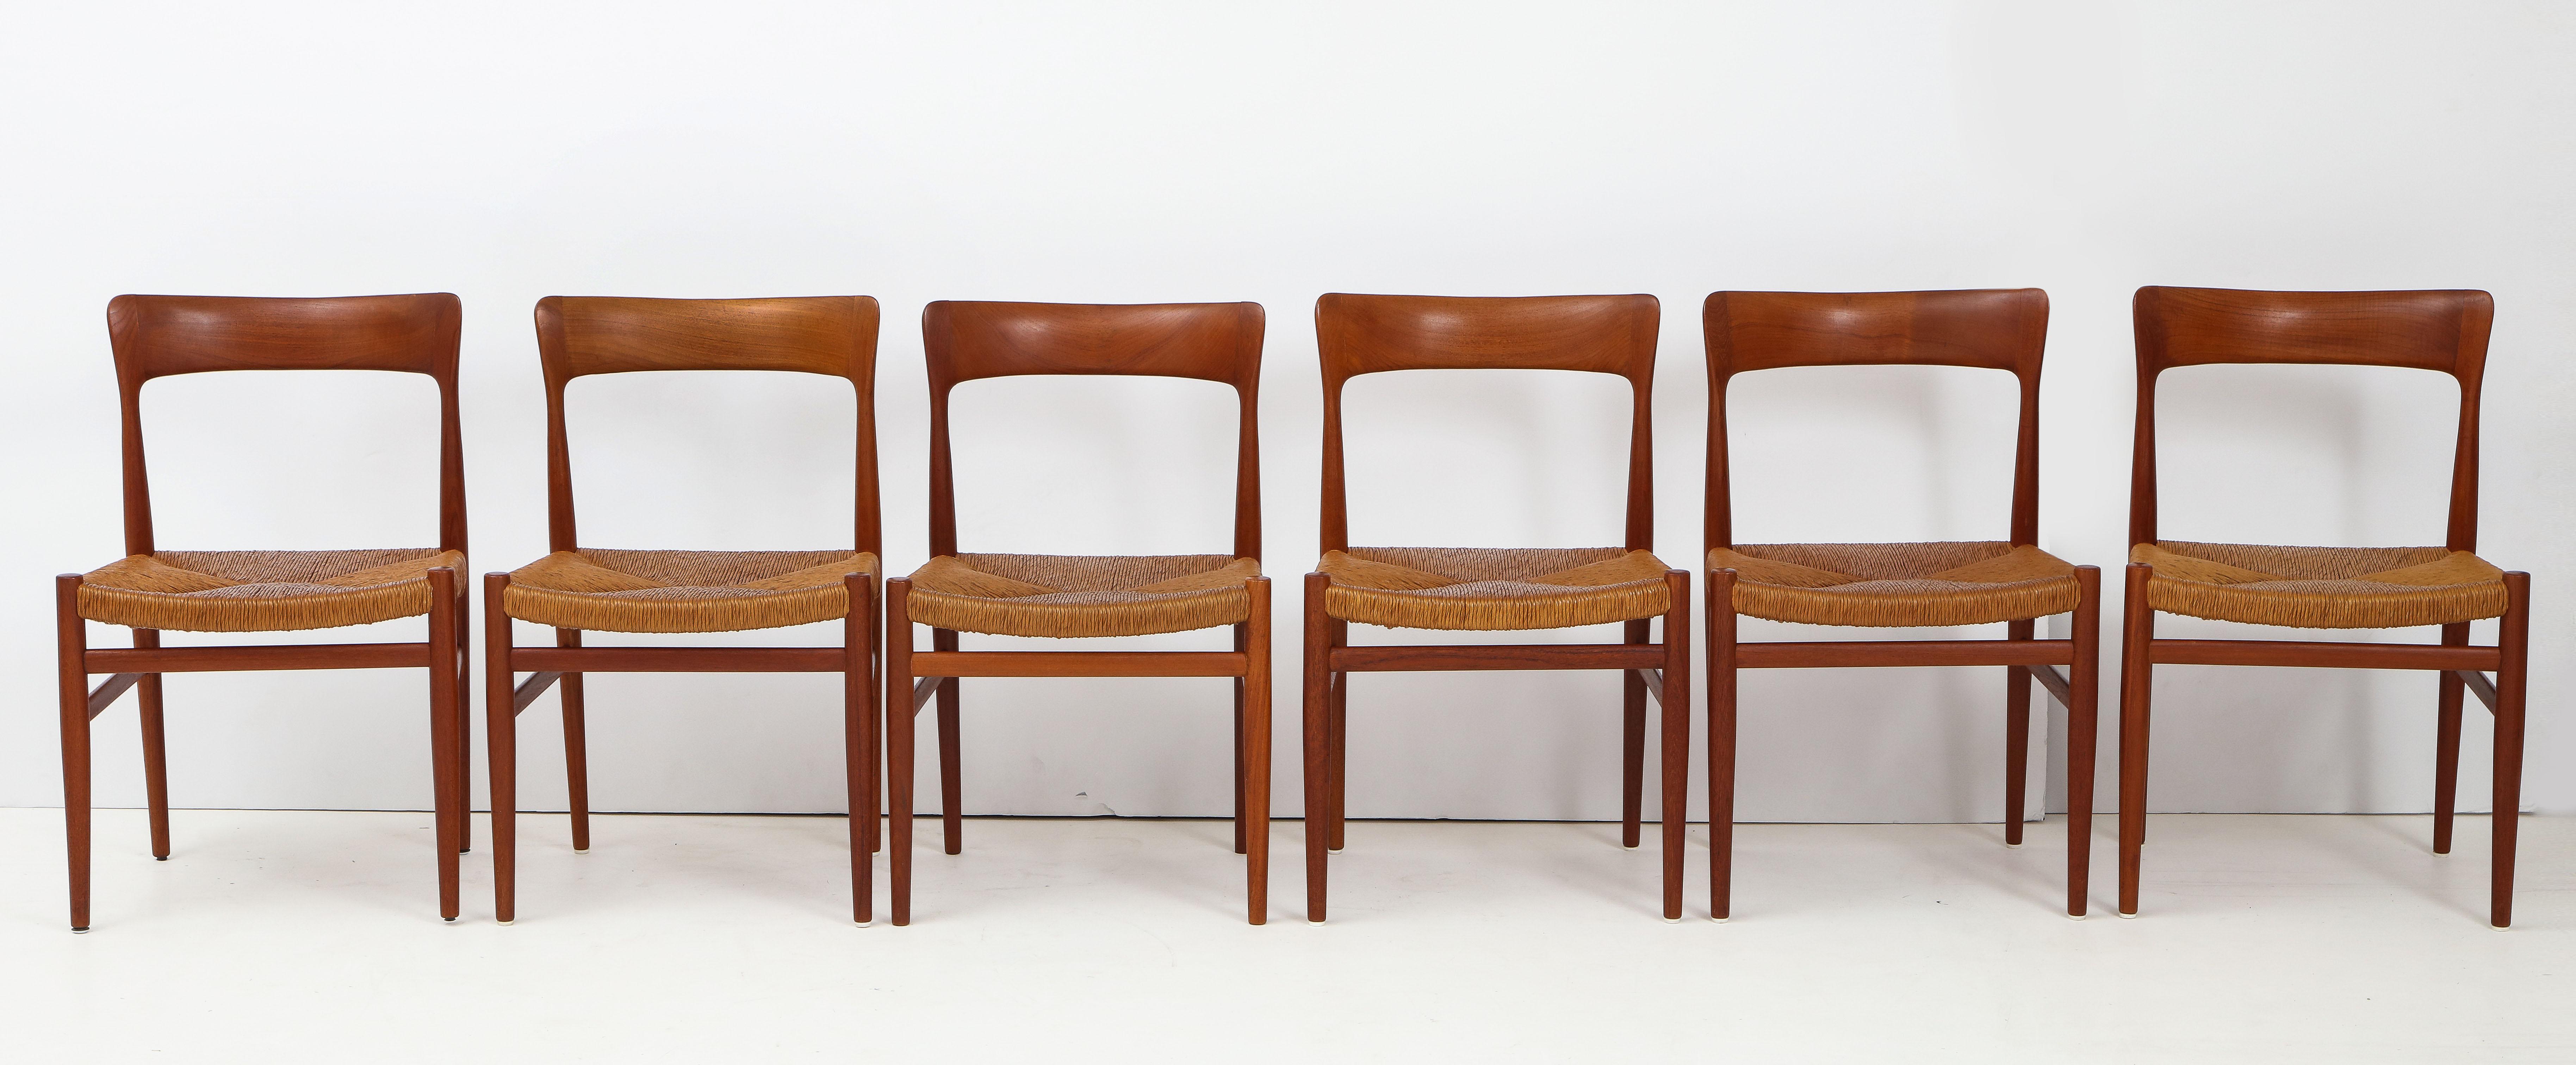 sculptural dining chairs